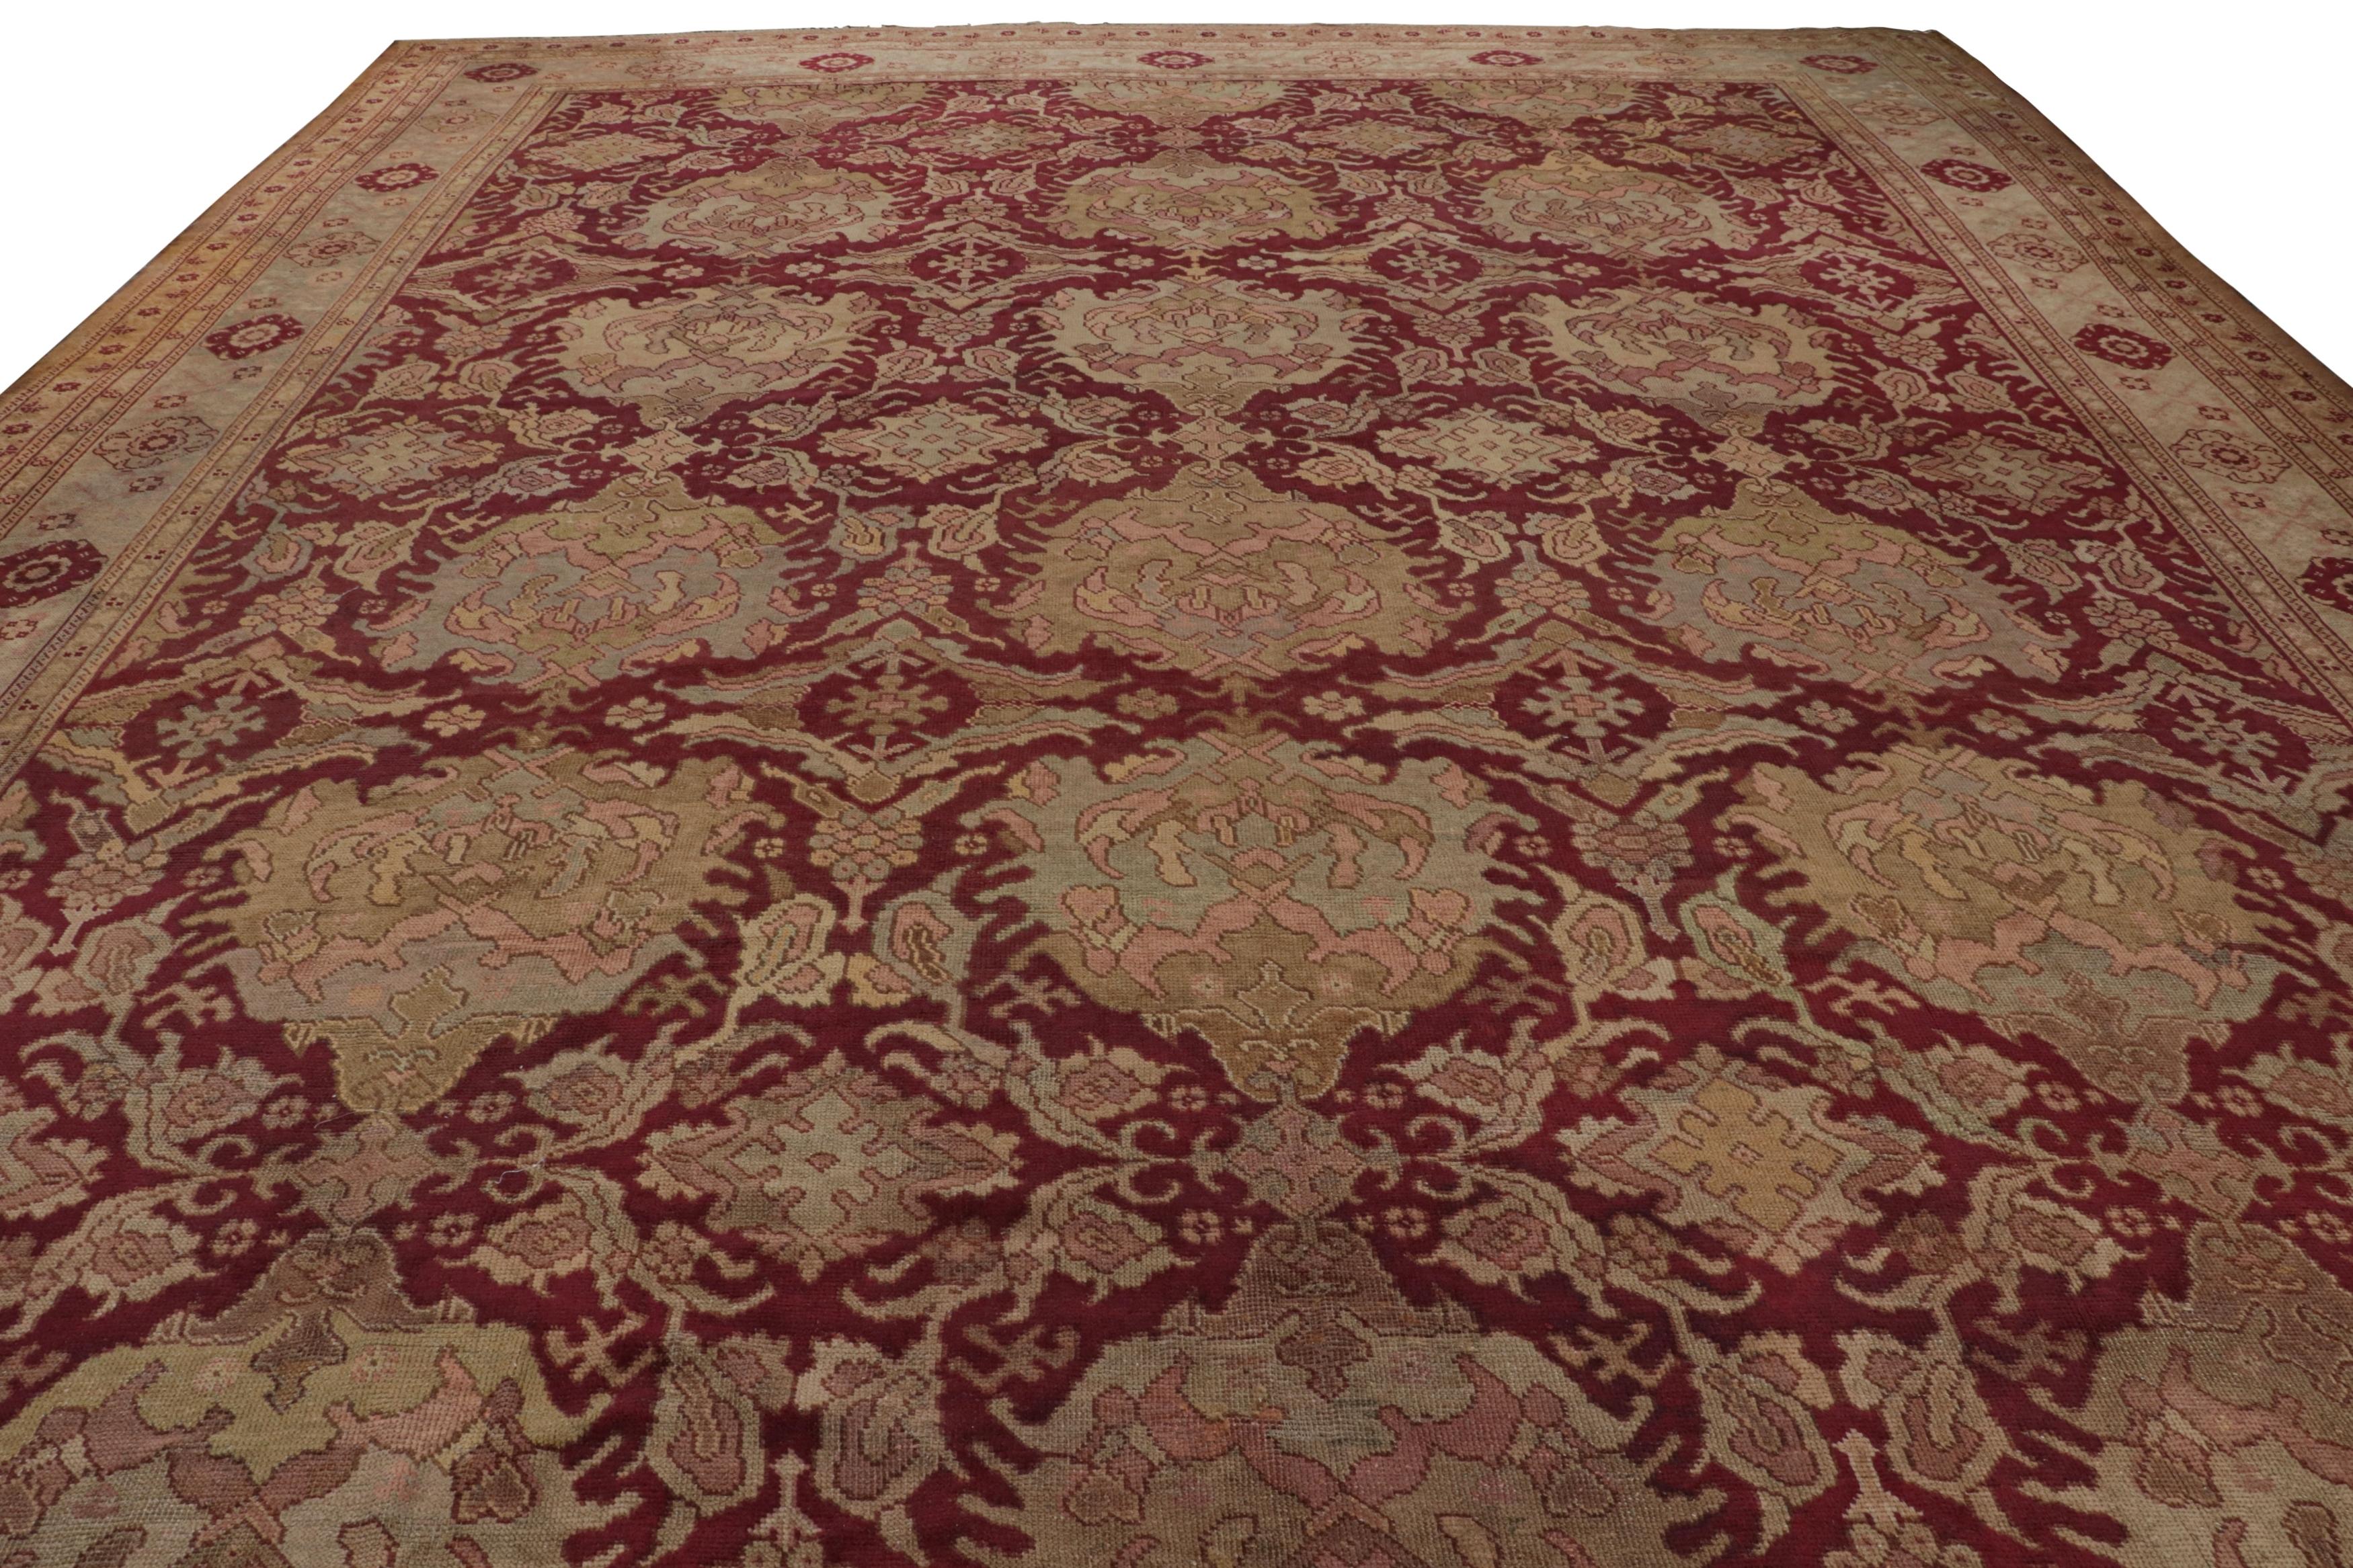 20th Century Hand-Knotted Antique Axminster Palace Rug—Red, Beige-Brown, Pink Floral Pattern For Sale